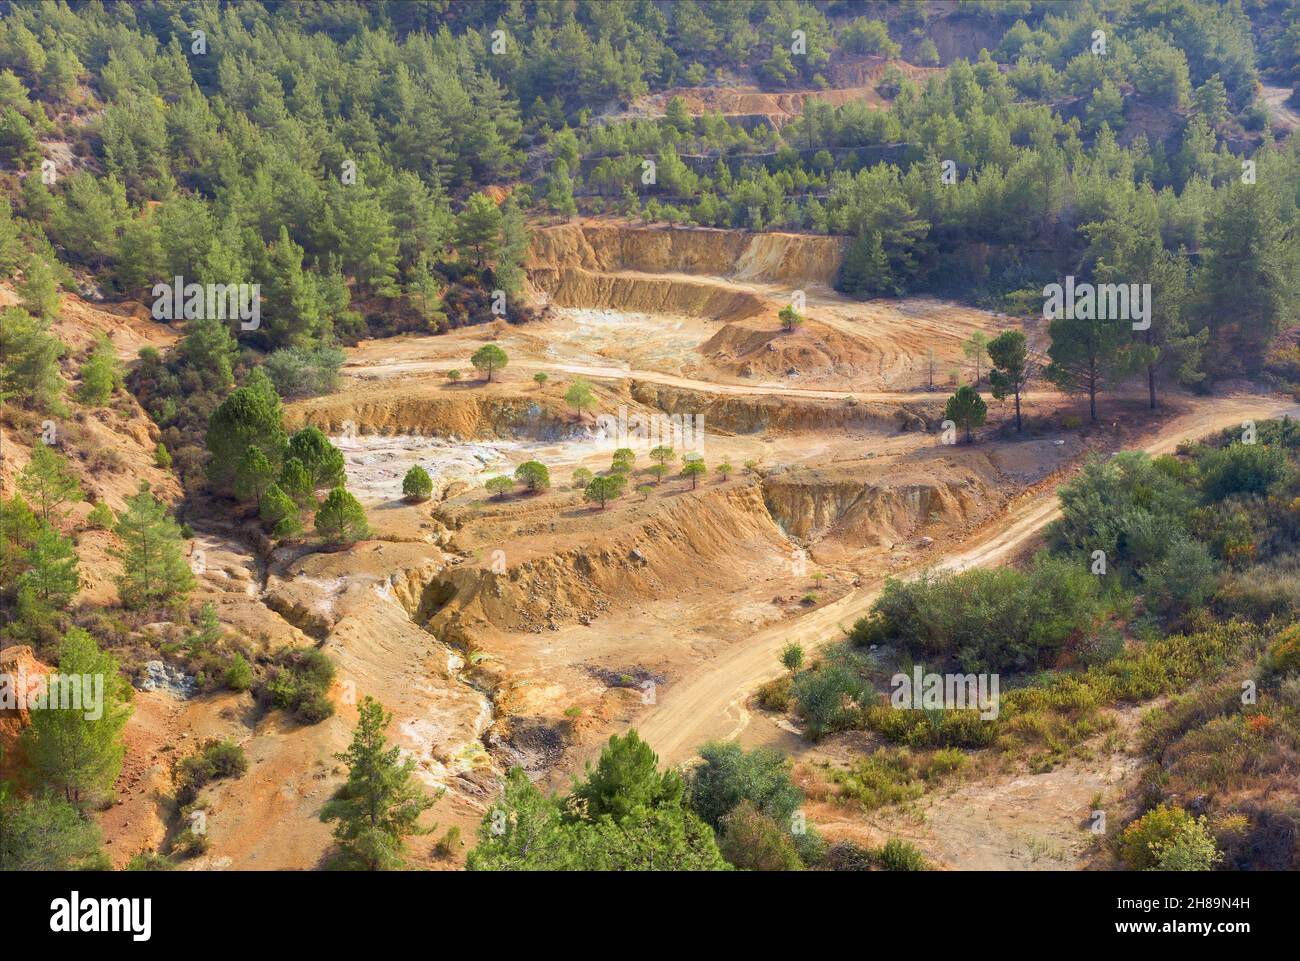 Ecosystem restoration. Reforestation in former open pit mine area in Cyprus, aerial view Stock Photo